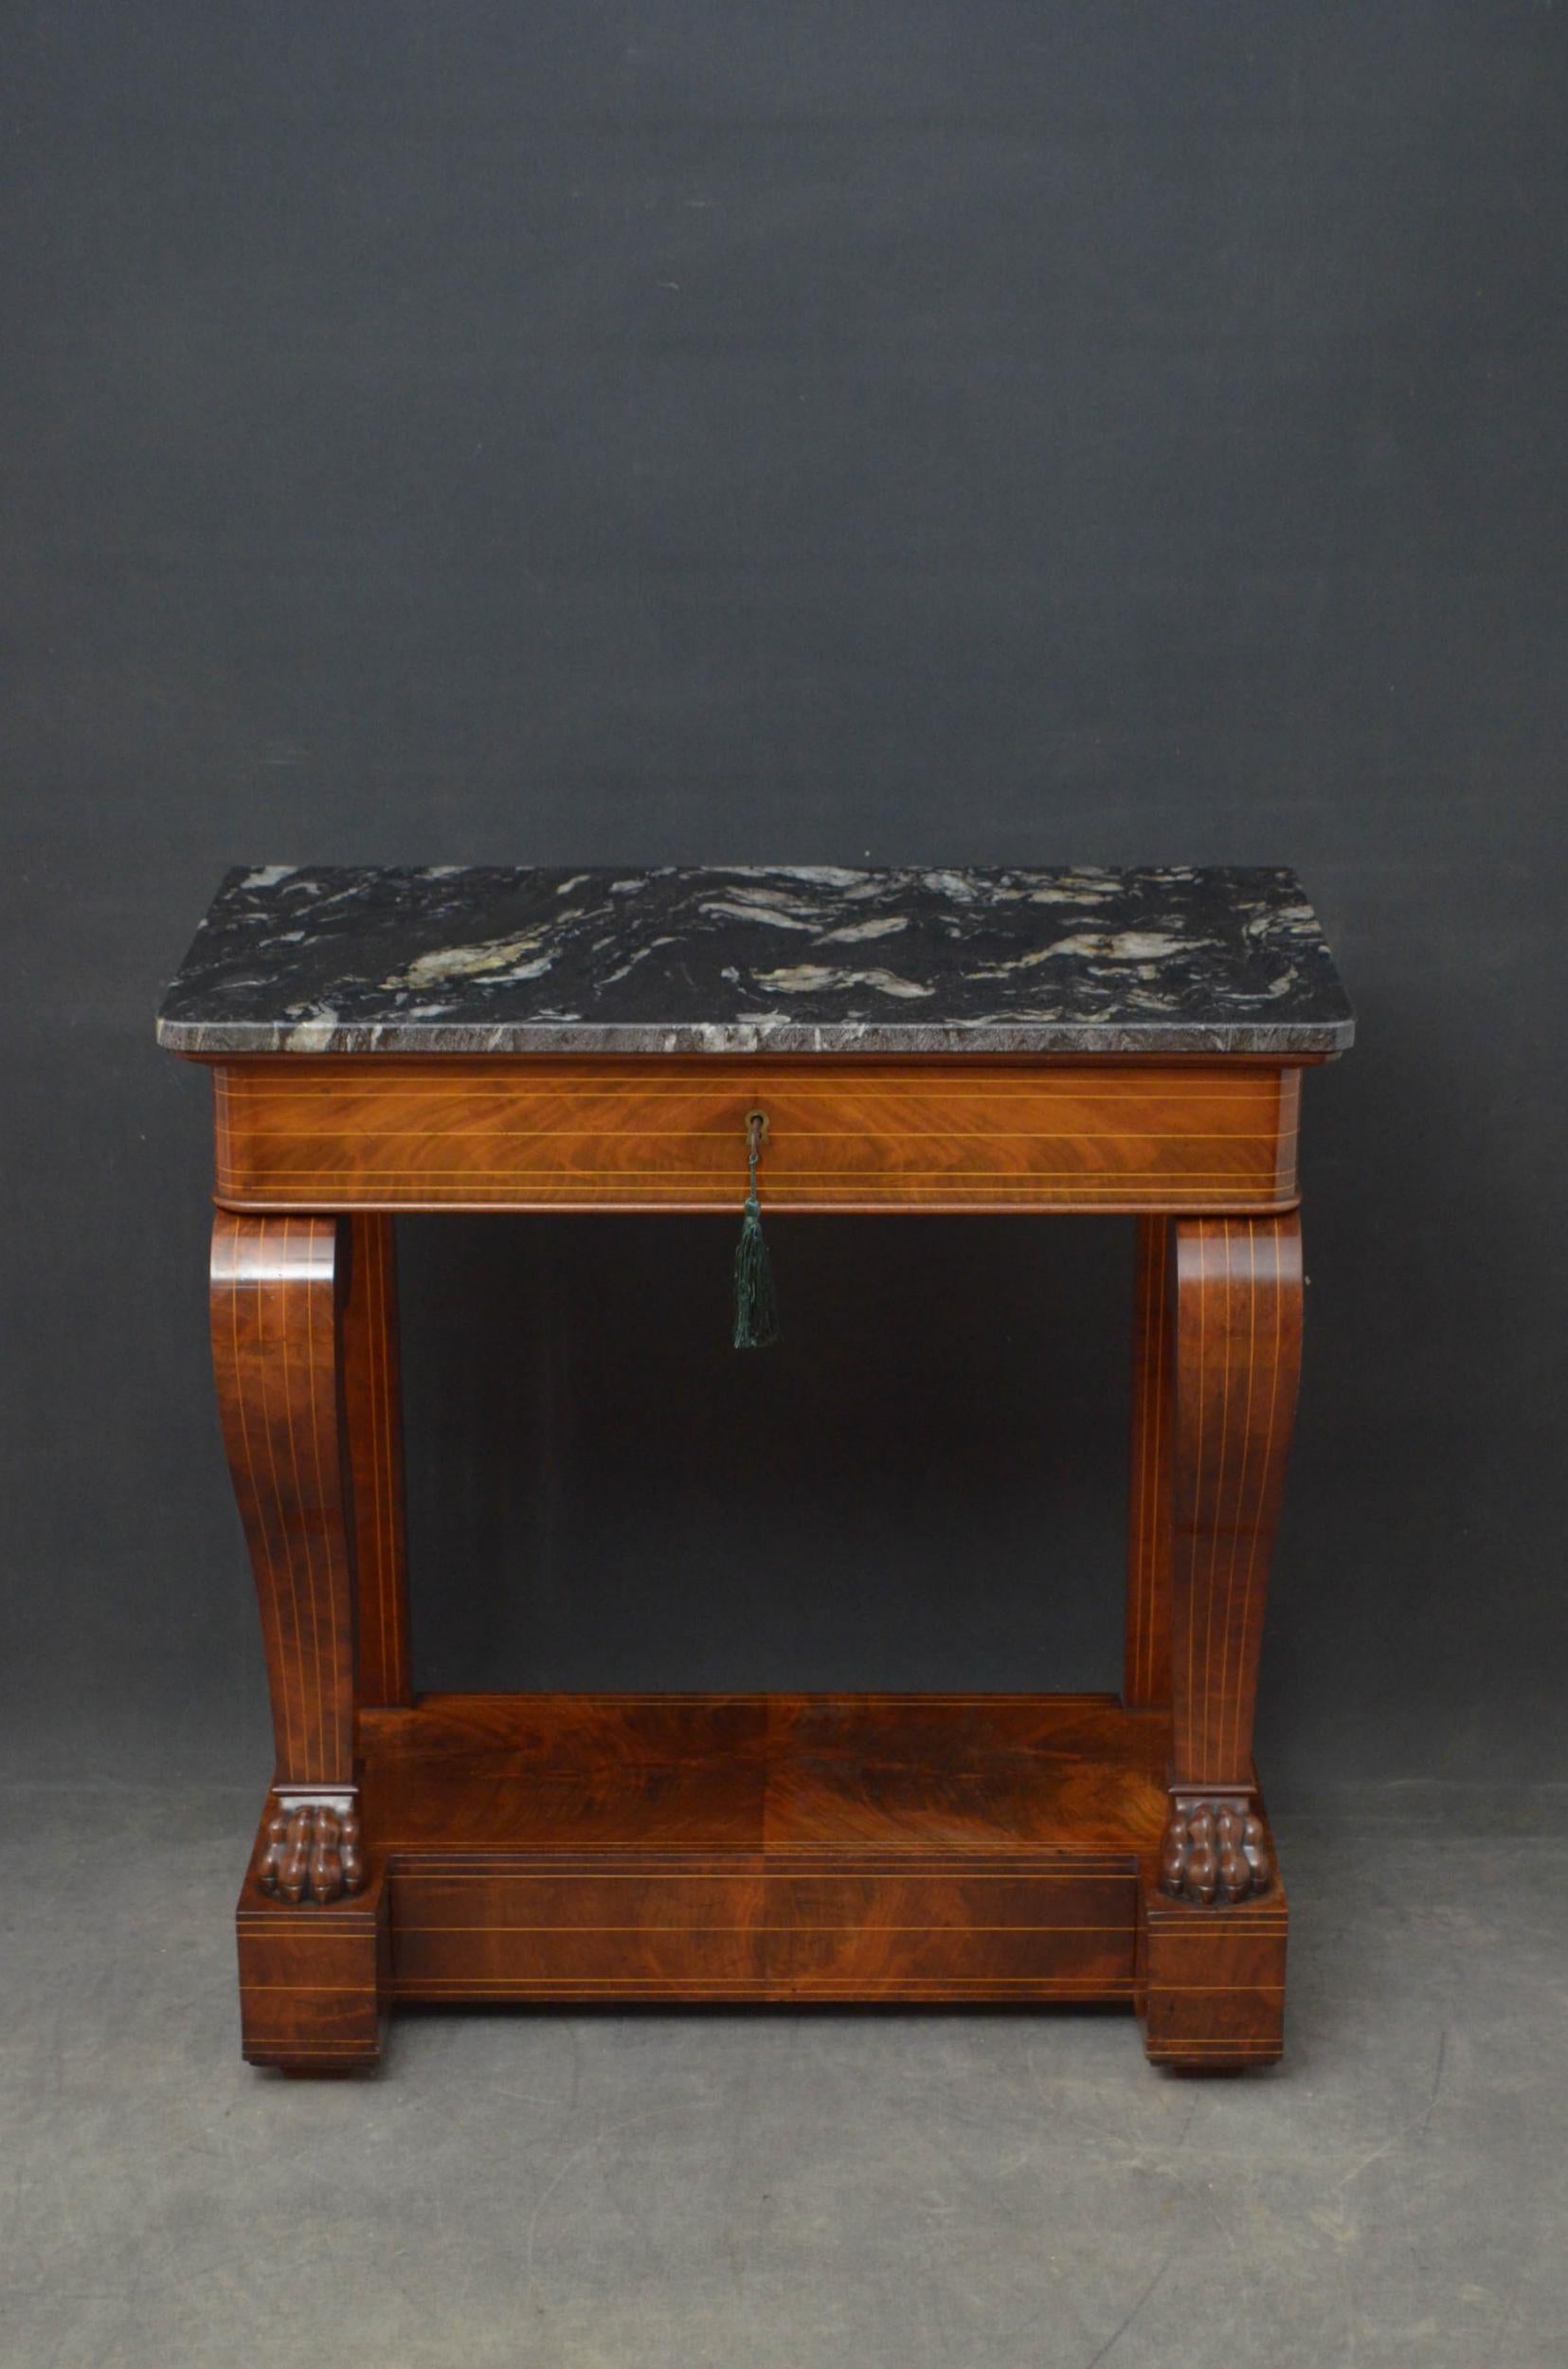 Sn4679 Fine quality French hall table in mahogany, having marble top above flamed mahogany, satinwood string inlaid drawer fitted with original working lock and a key, raised on S shaped inlaid supports with paw feet terminating in flamed mahogany